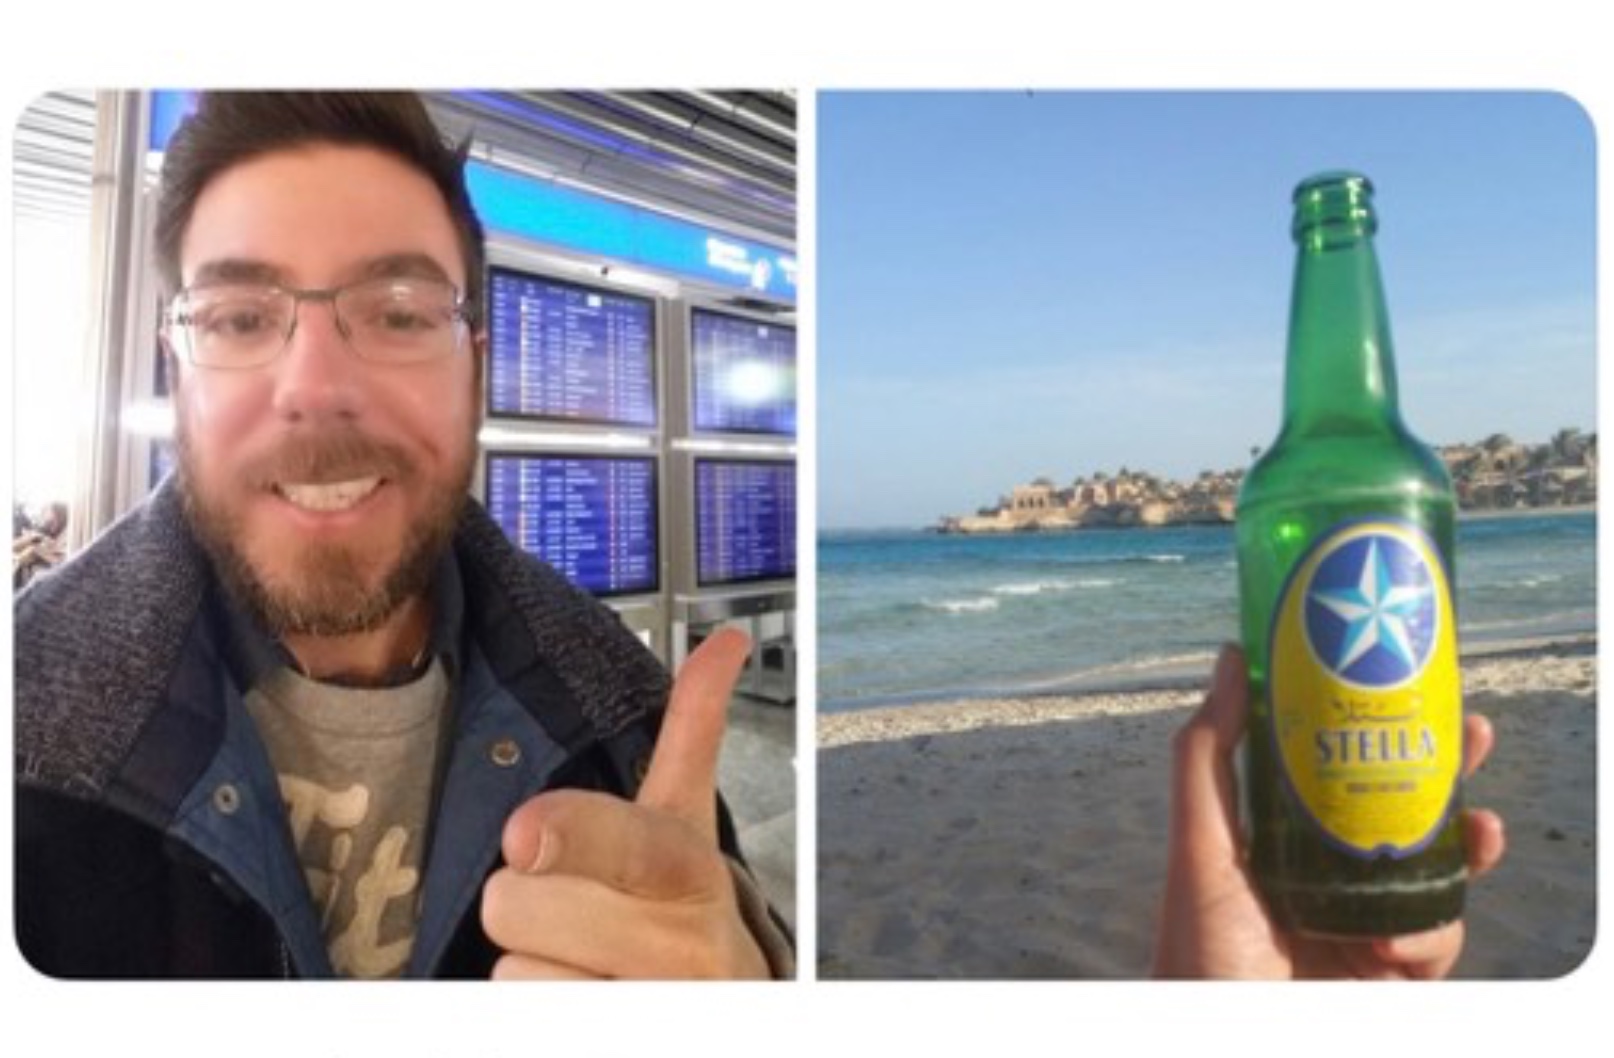 Bitcoin in Brief Thursday: Another ICO Ghosts with $50 Million - Sends Thanx from Beer Beach